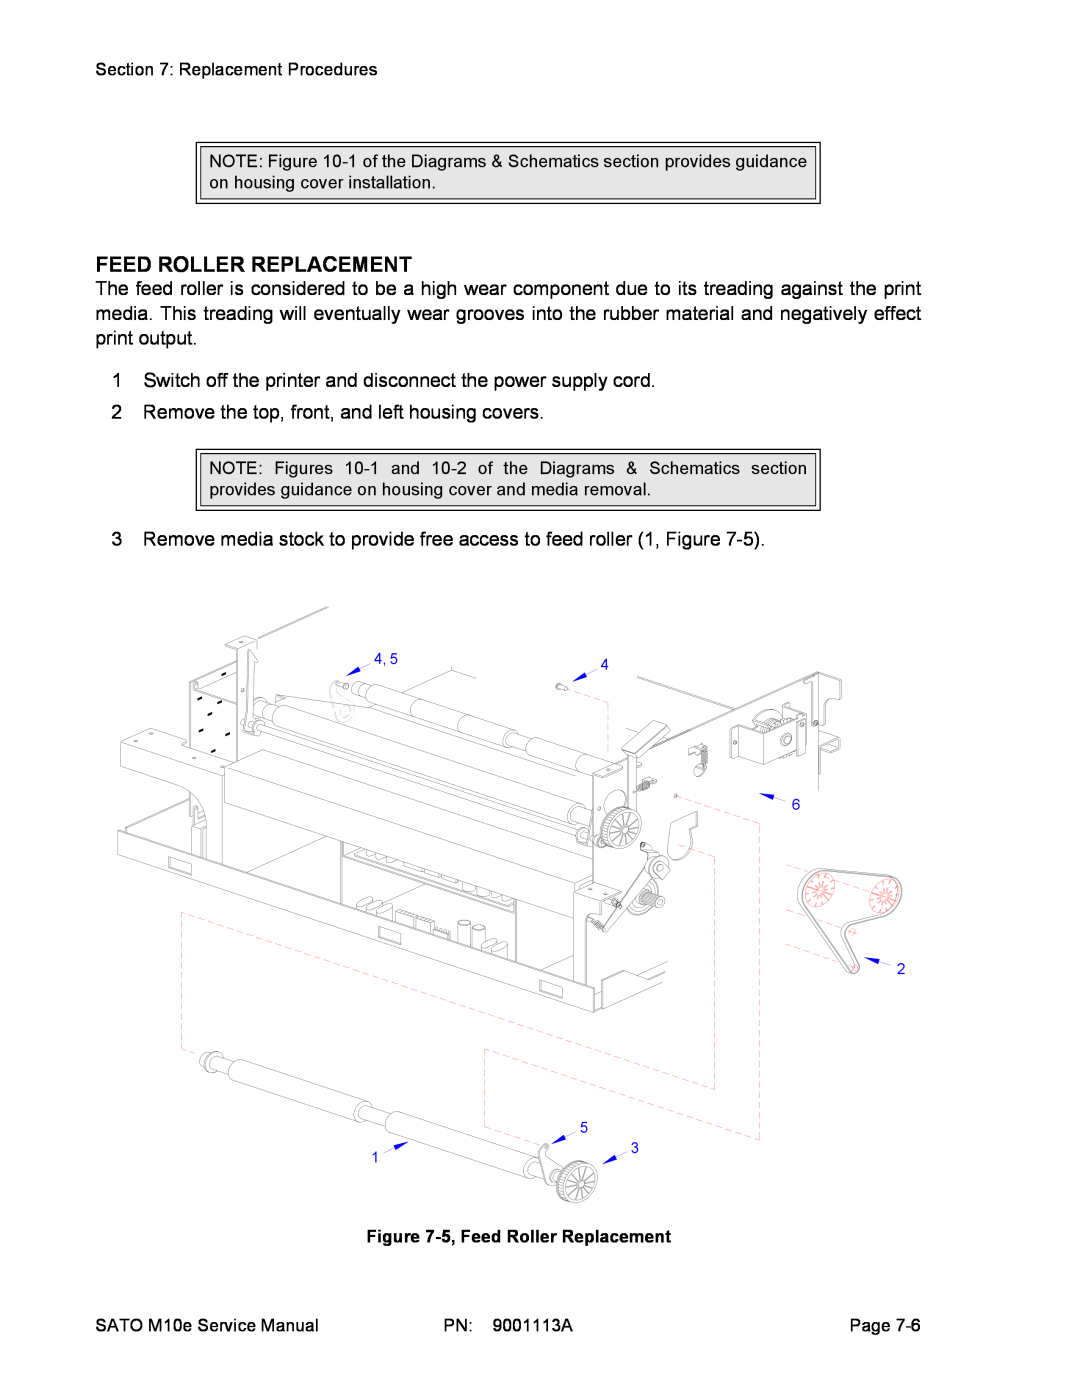 SATO 10e service manual 5, Feed Roller Replacement 